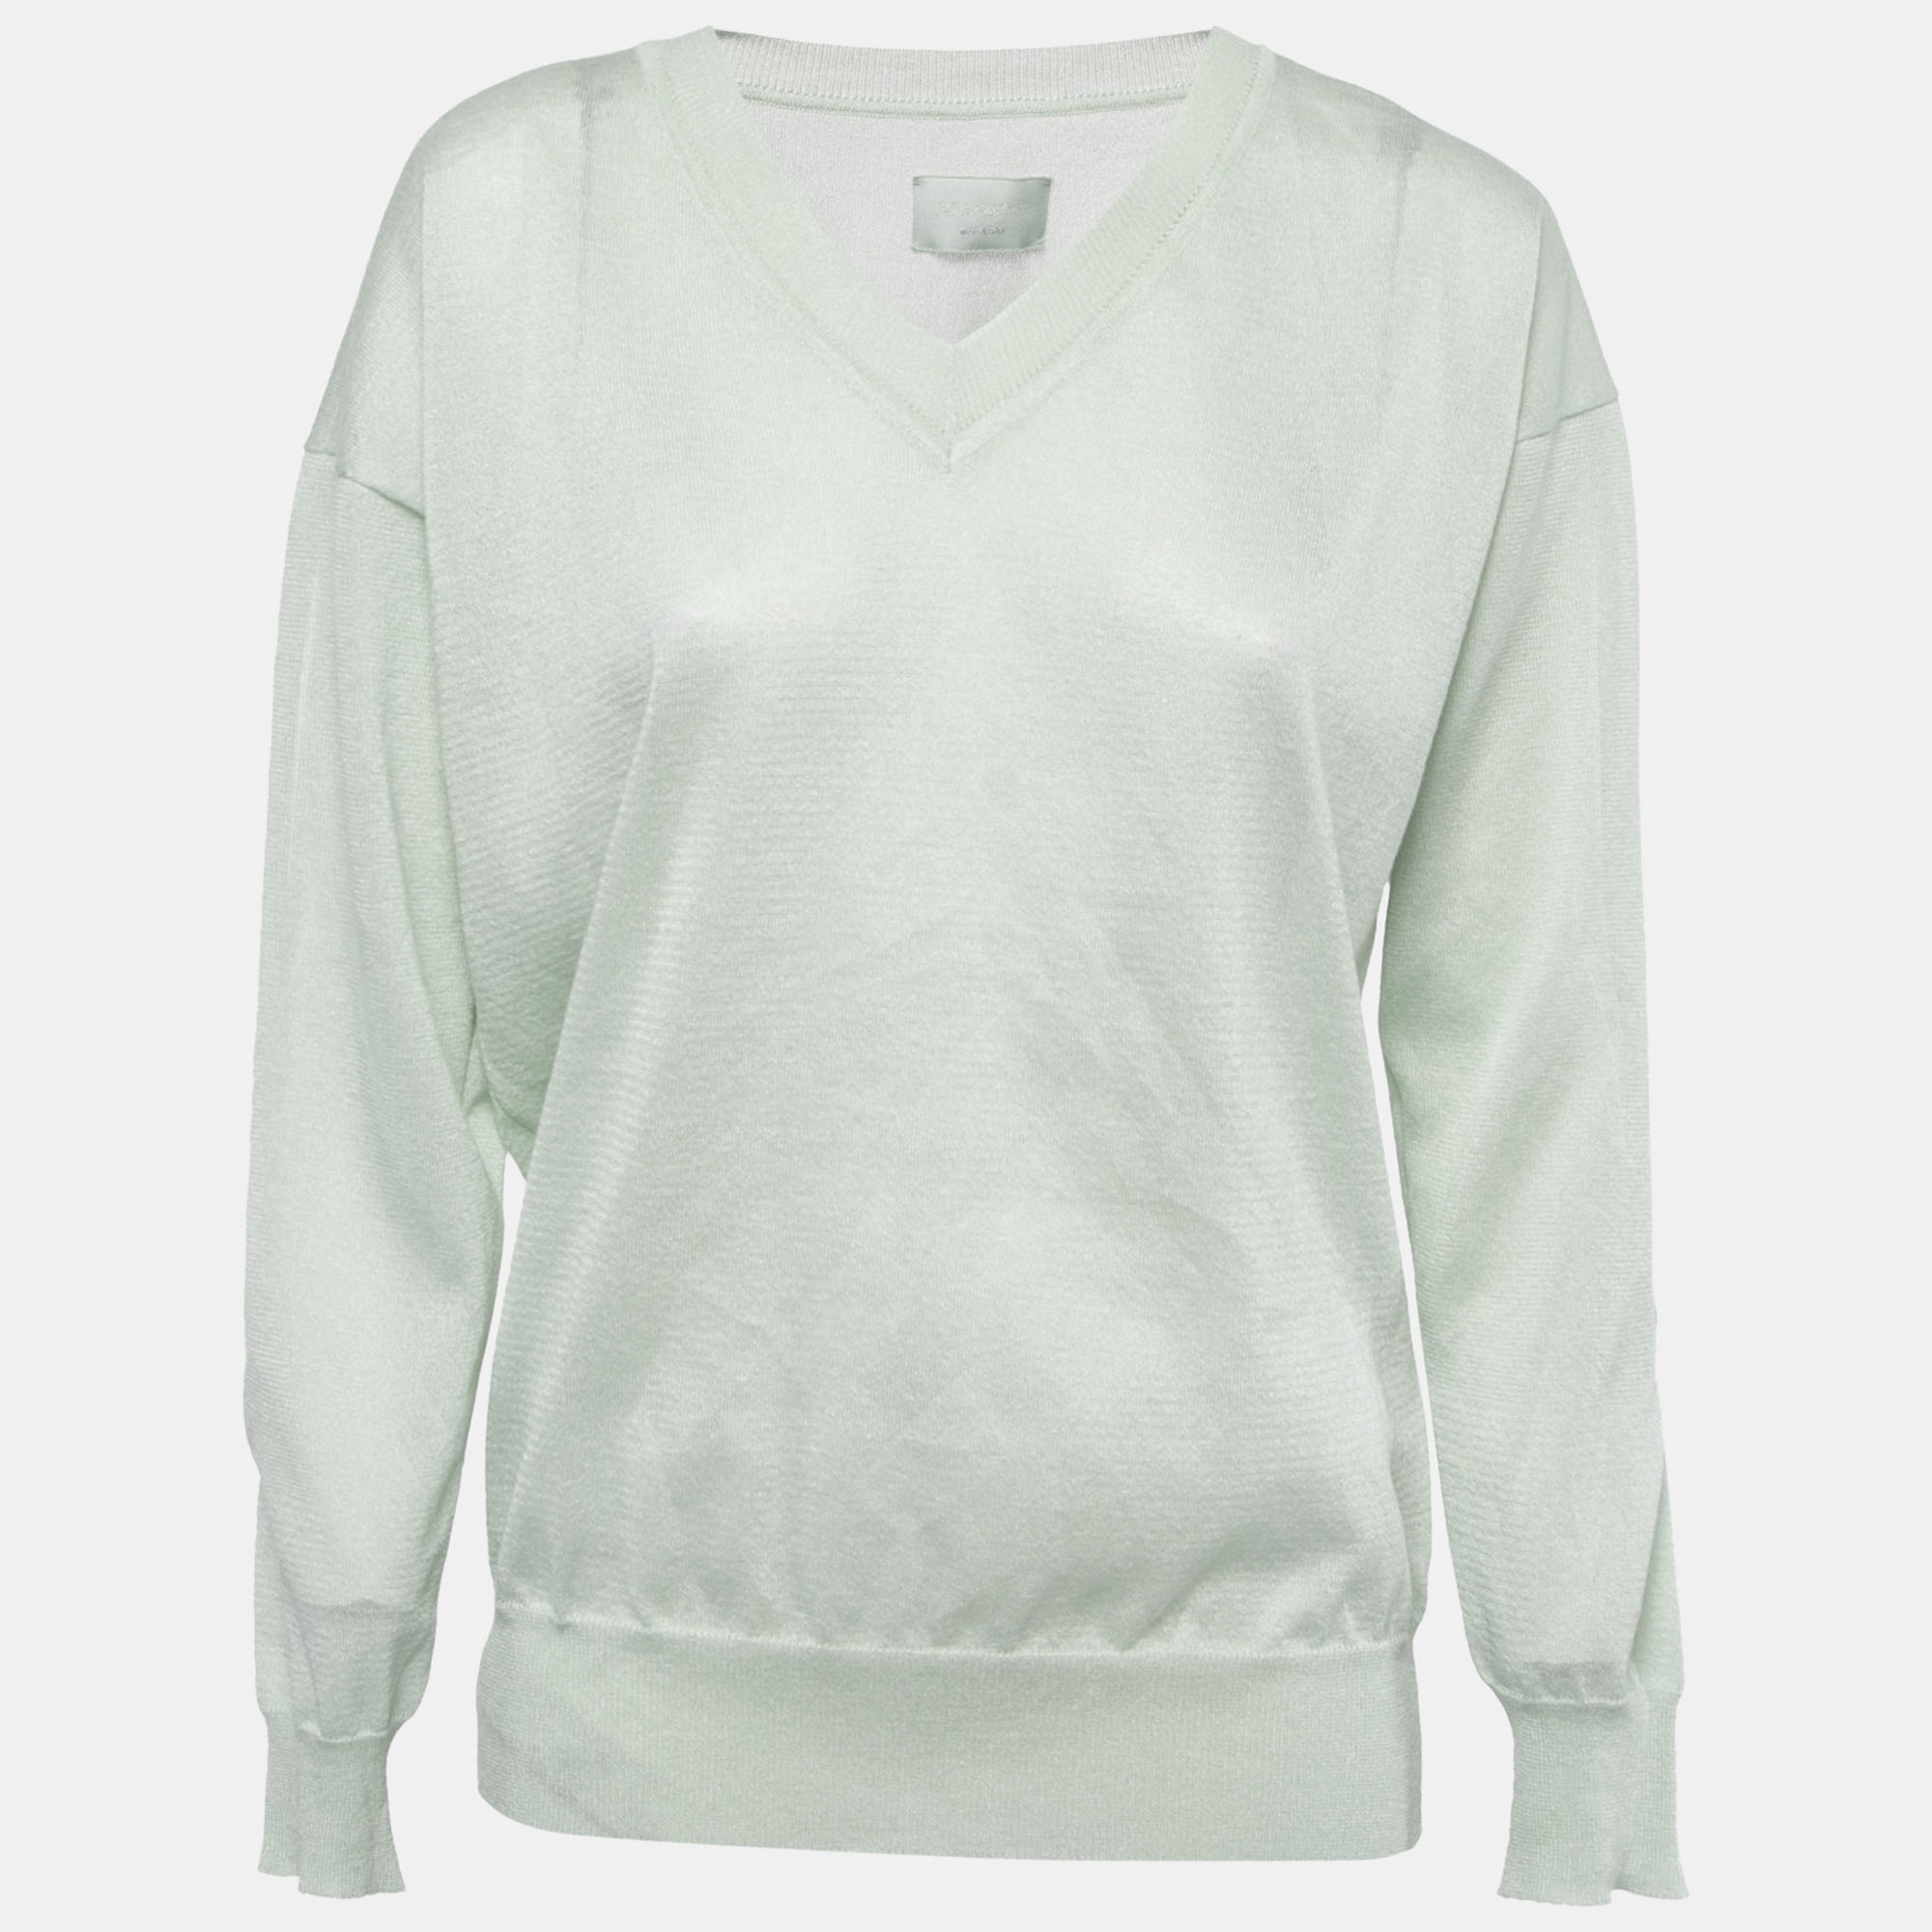 Zadig & Voltaire Light Green Knit V-Neck Sweater Top S